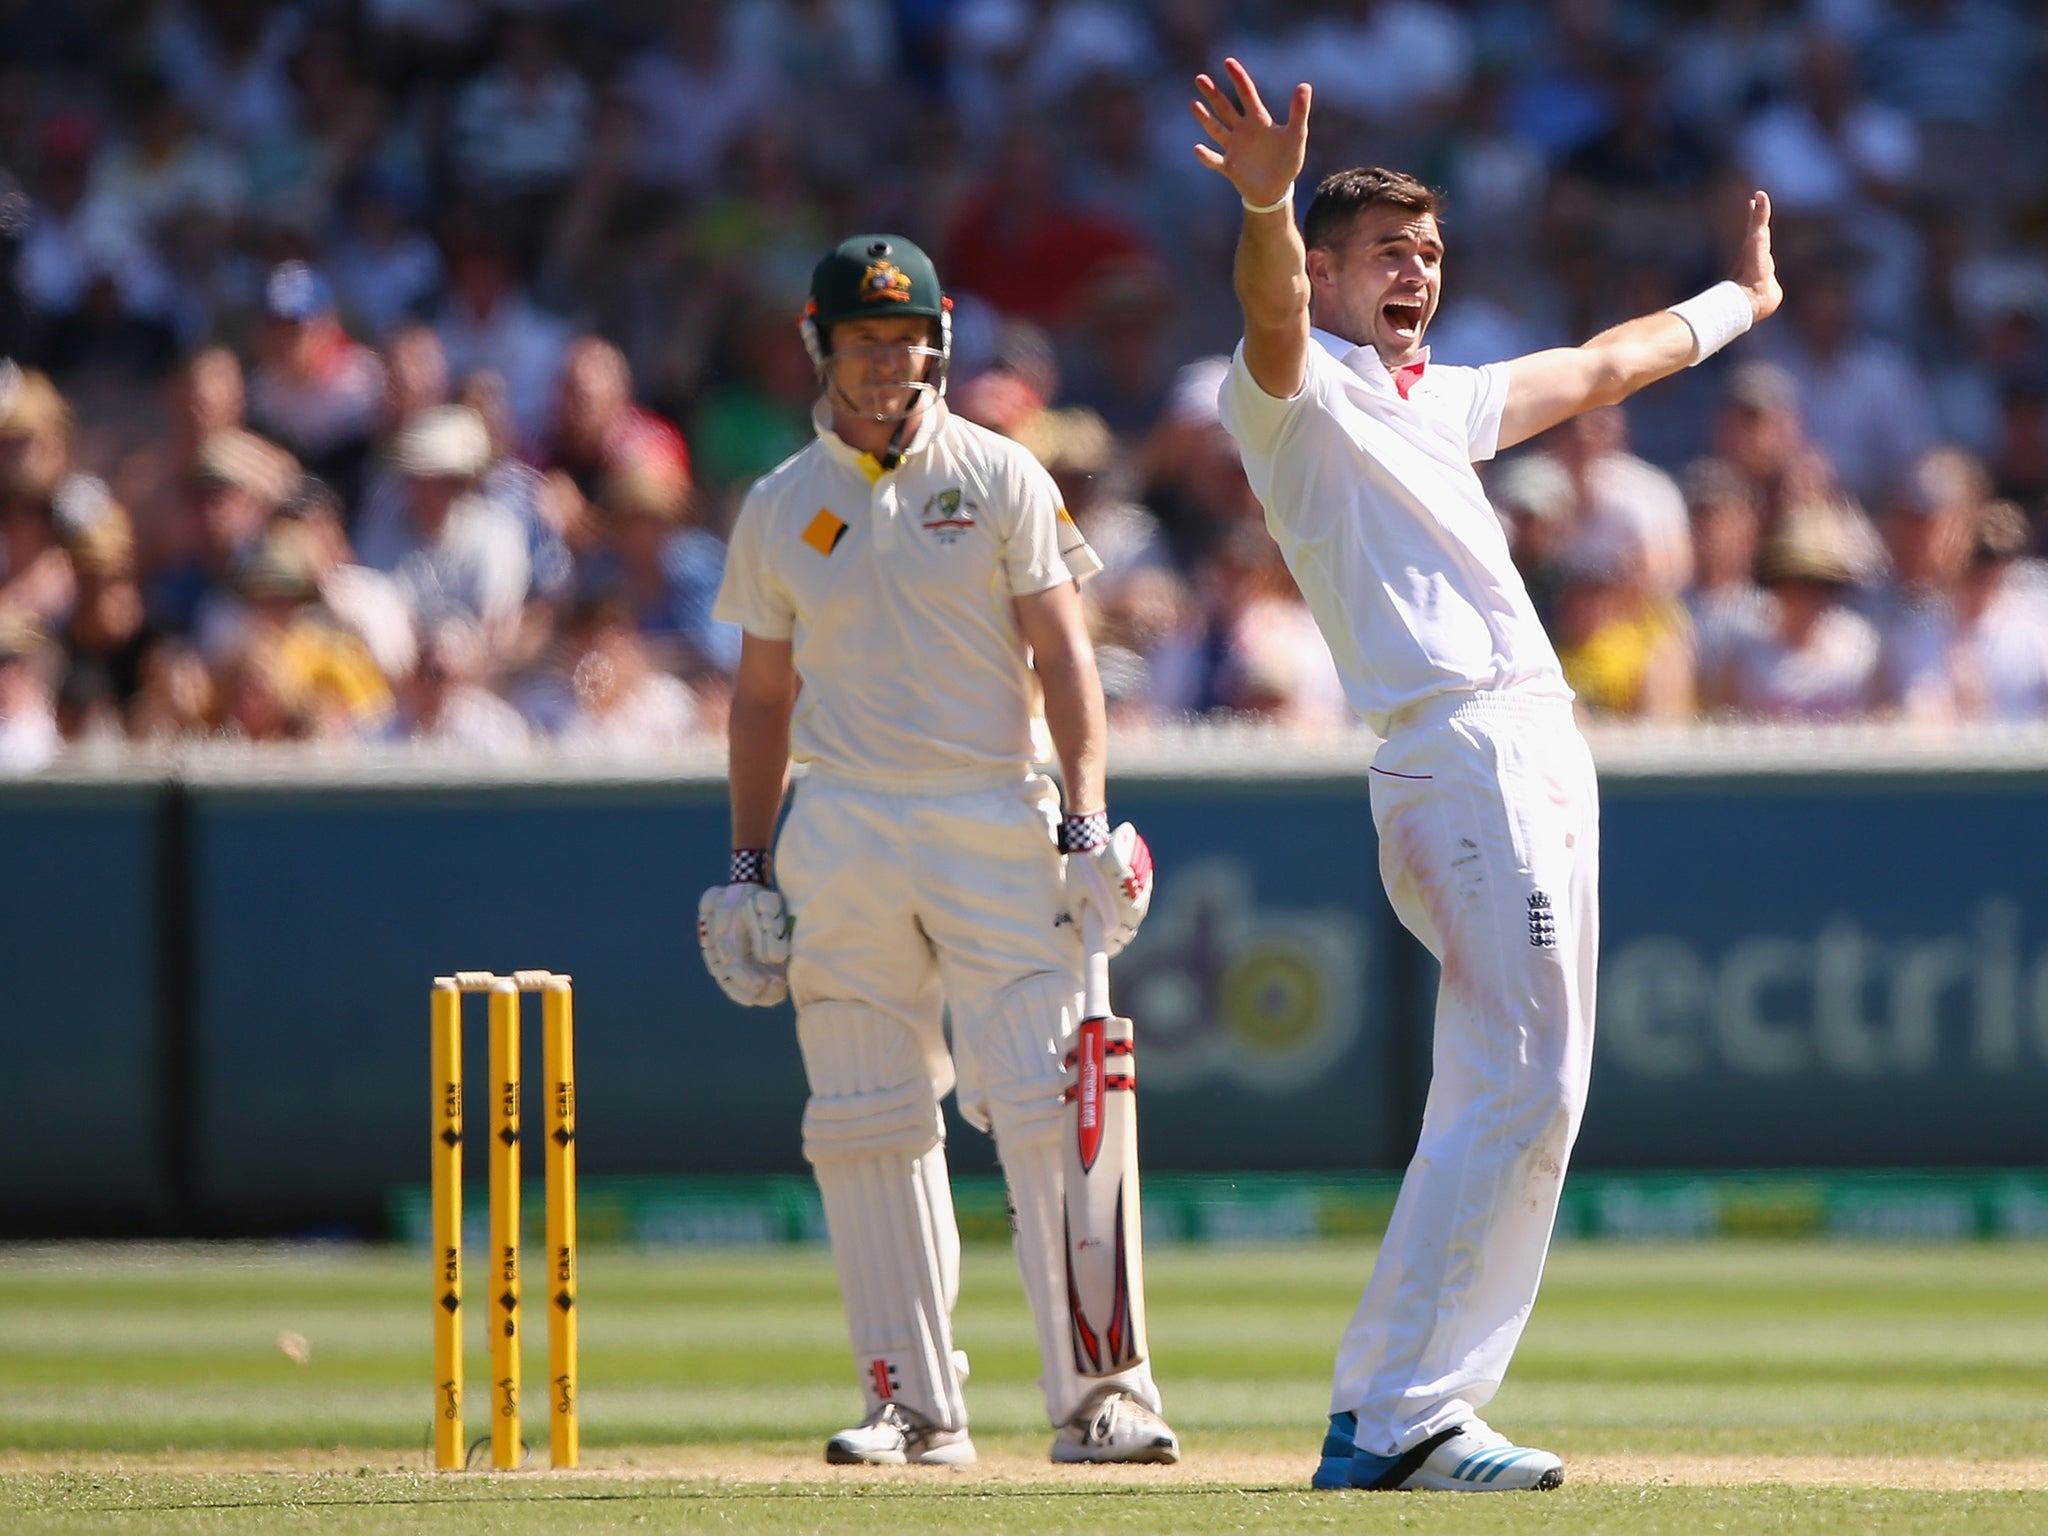 James Anderson appeals for the wicket of George Bailey, who went for a duck in the first innings of the Fourth Test